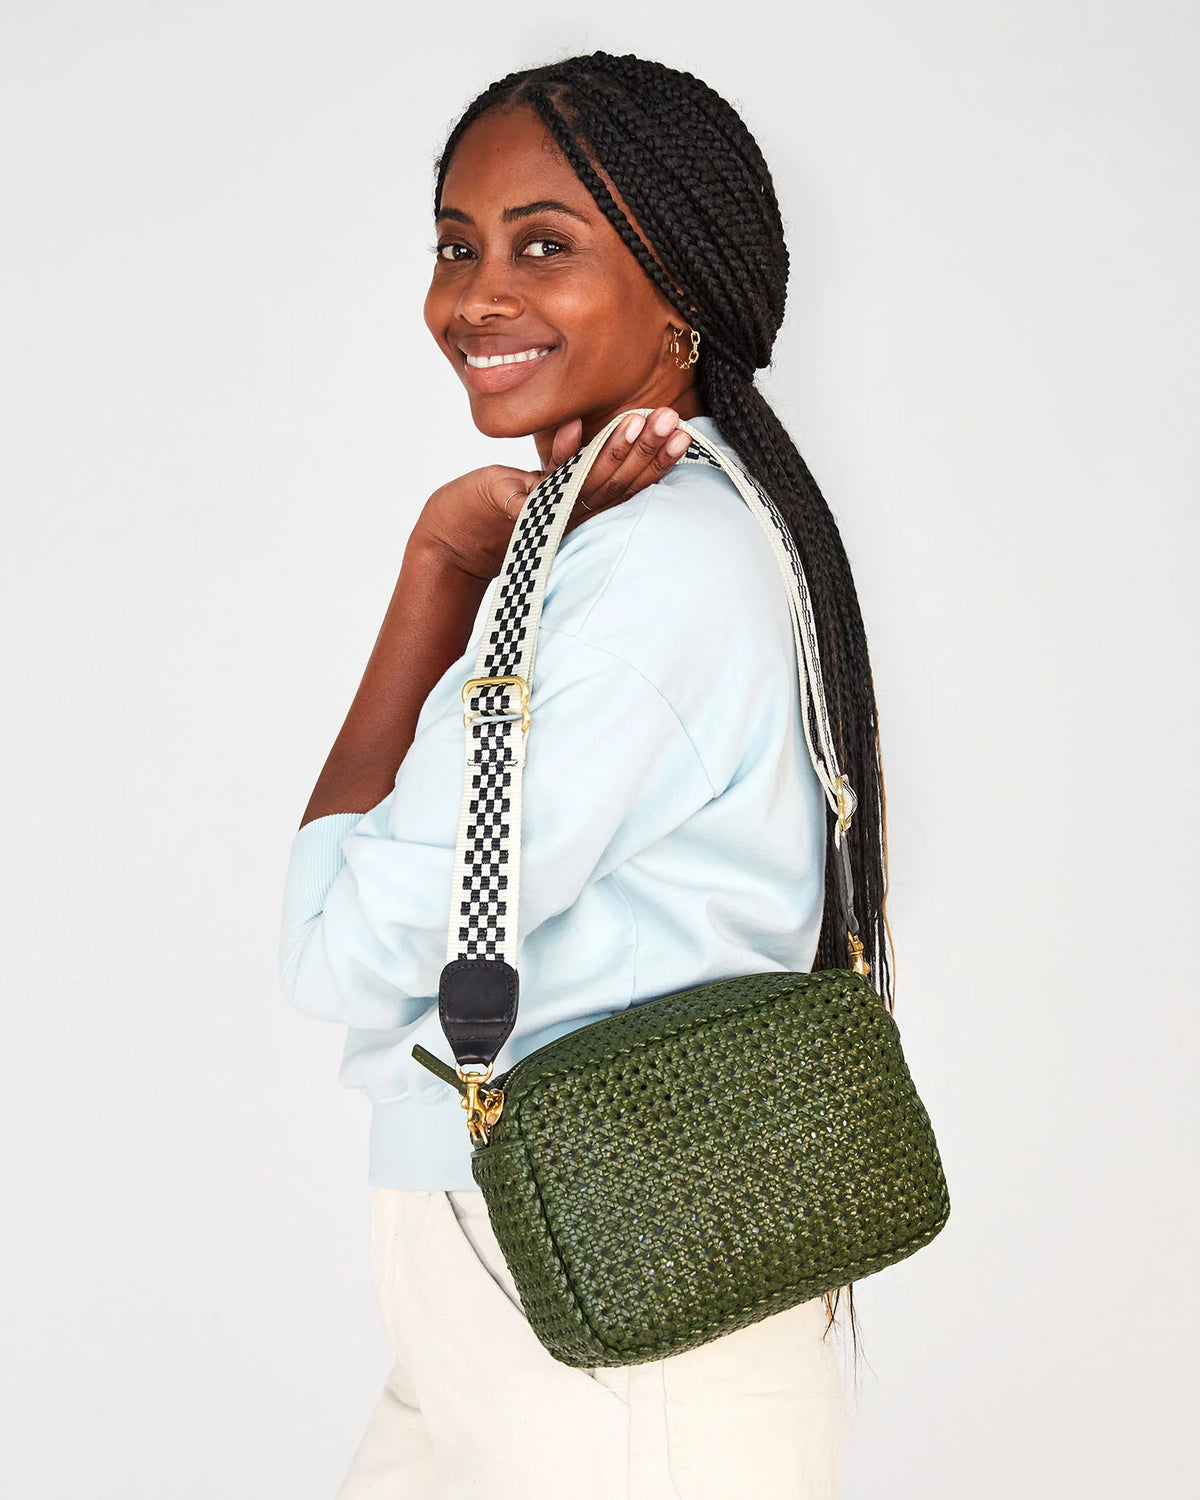 Marisol with Front Pocket Crossbody